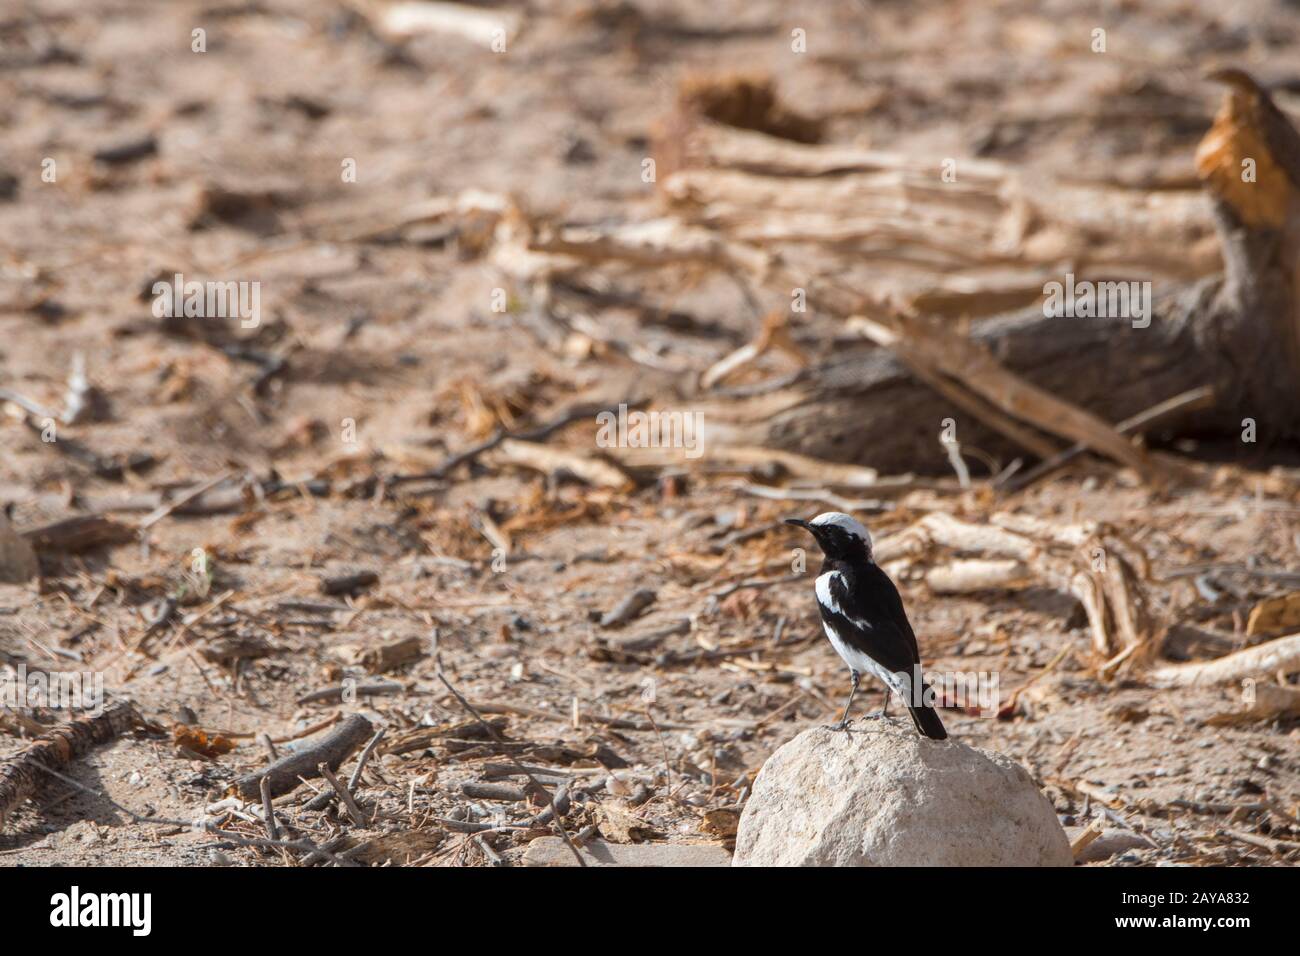 A male Mountain Wheatear (Oenanthe monticola) is sitting on a rock in the Huanib River Valley in northern Damaraland/Kaokoland, Namibia. Stock Photo